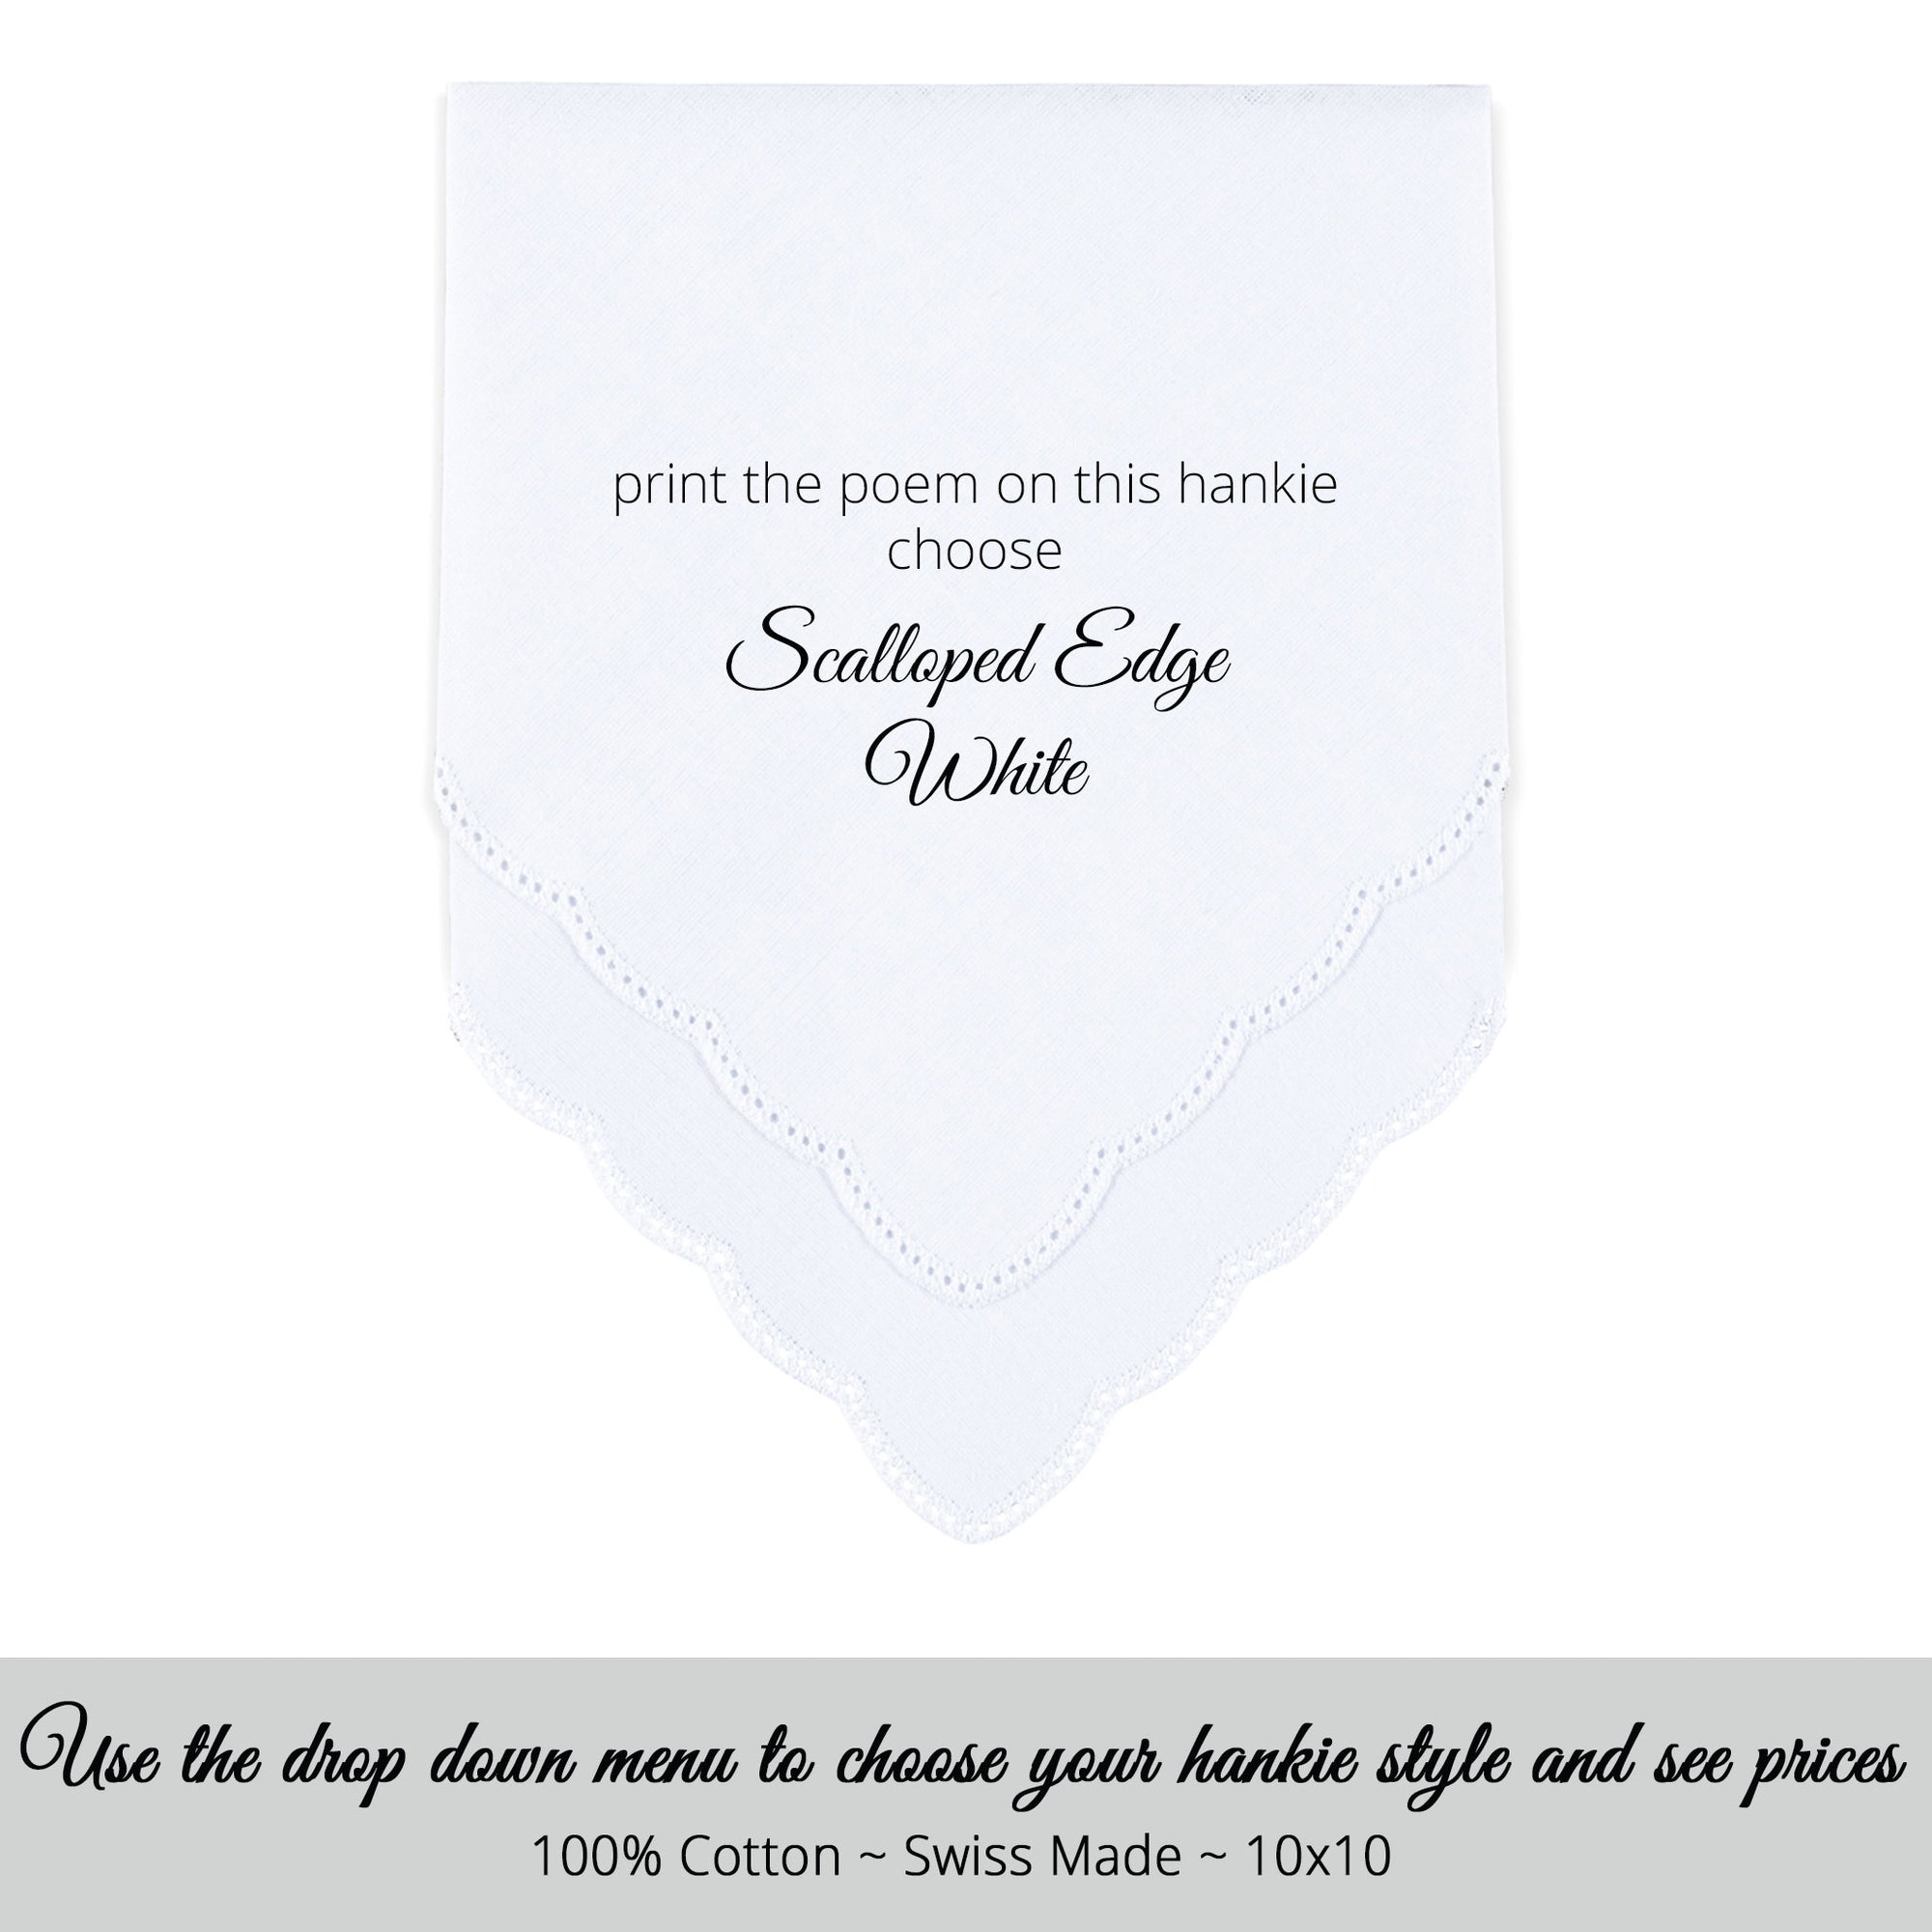 Wedding Handkerchief Scalloped edge white personalized poem for the sister of the bride matron of honor